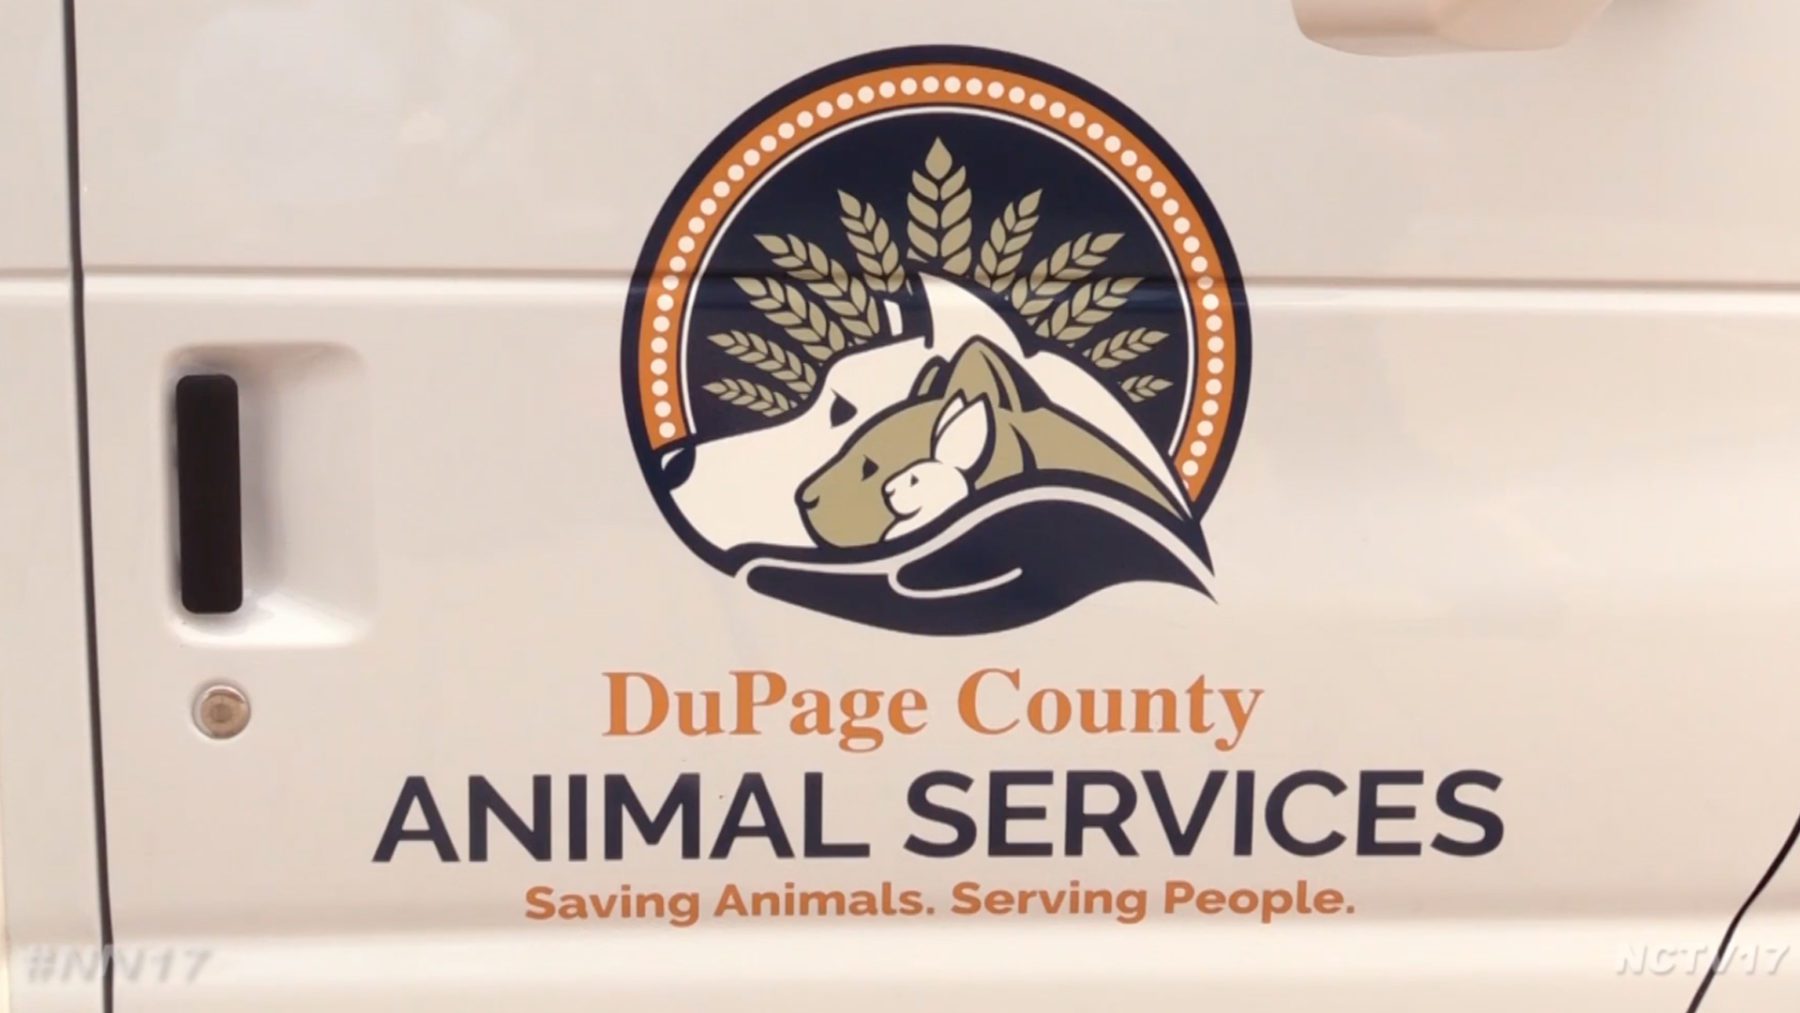 DuPage County Animal Services Holds Large Dog No-Fee Adoption Event | NCTV17